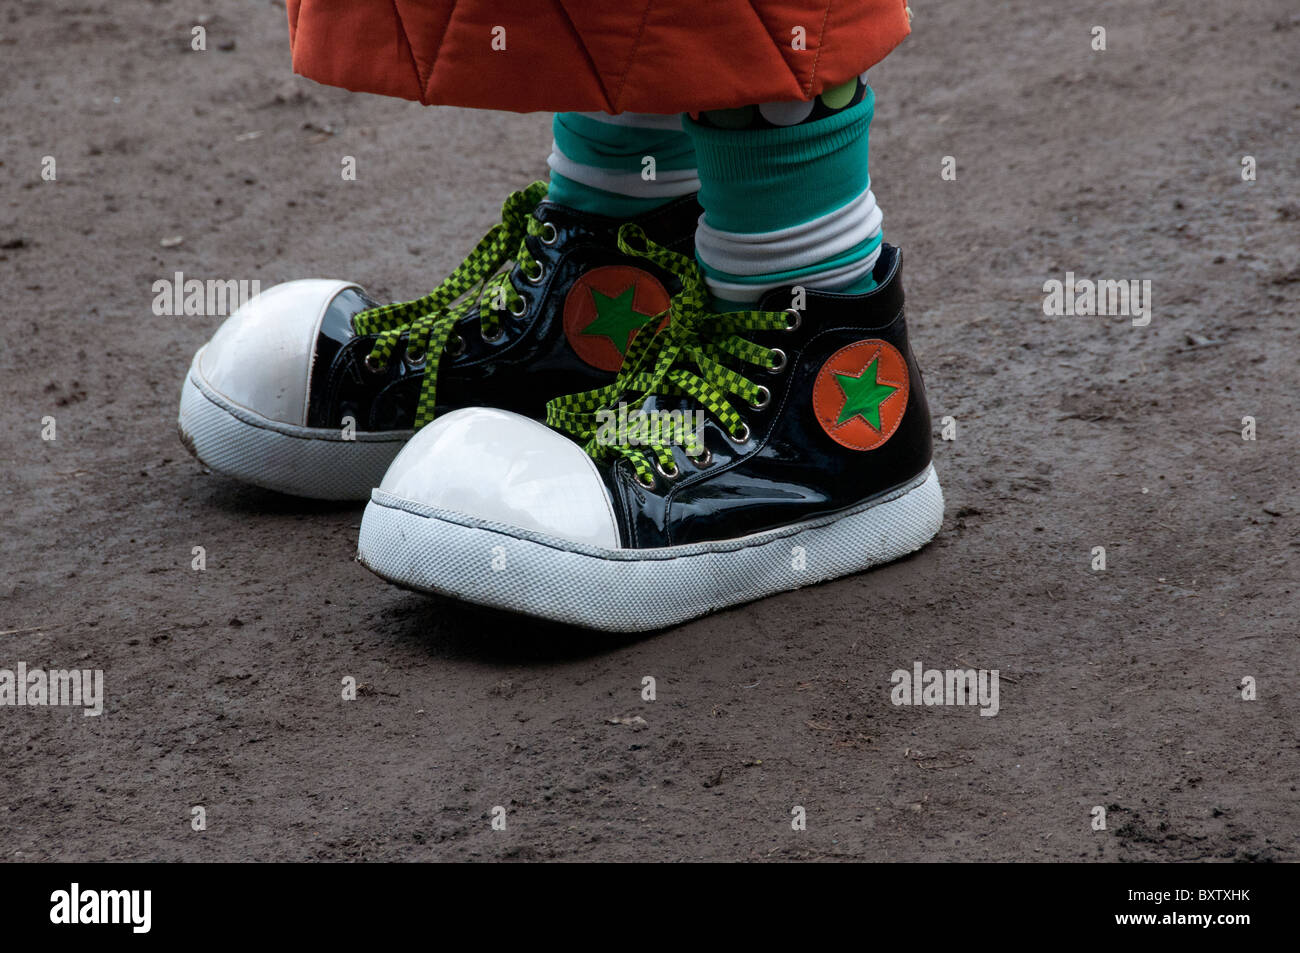 Shoes of a clown Stock Photo - Alamy